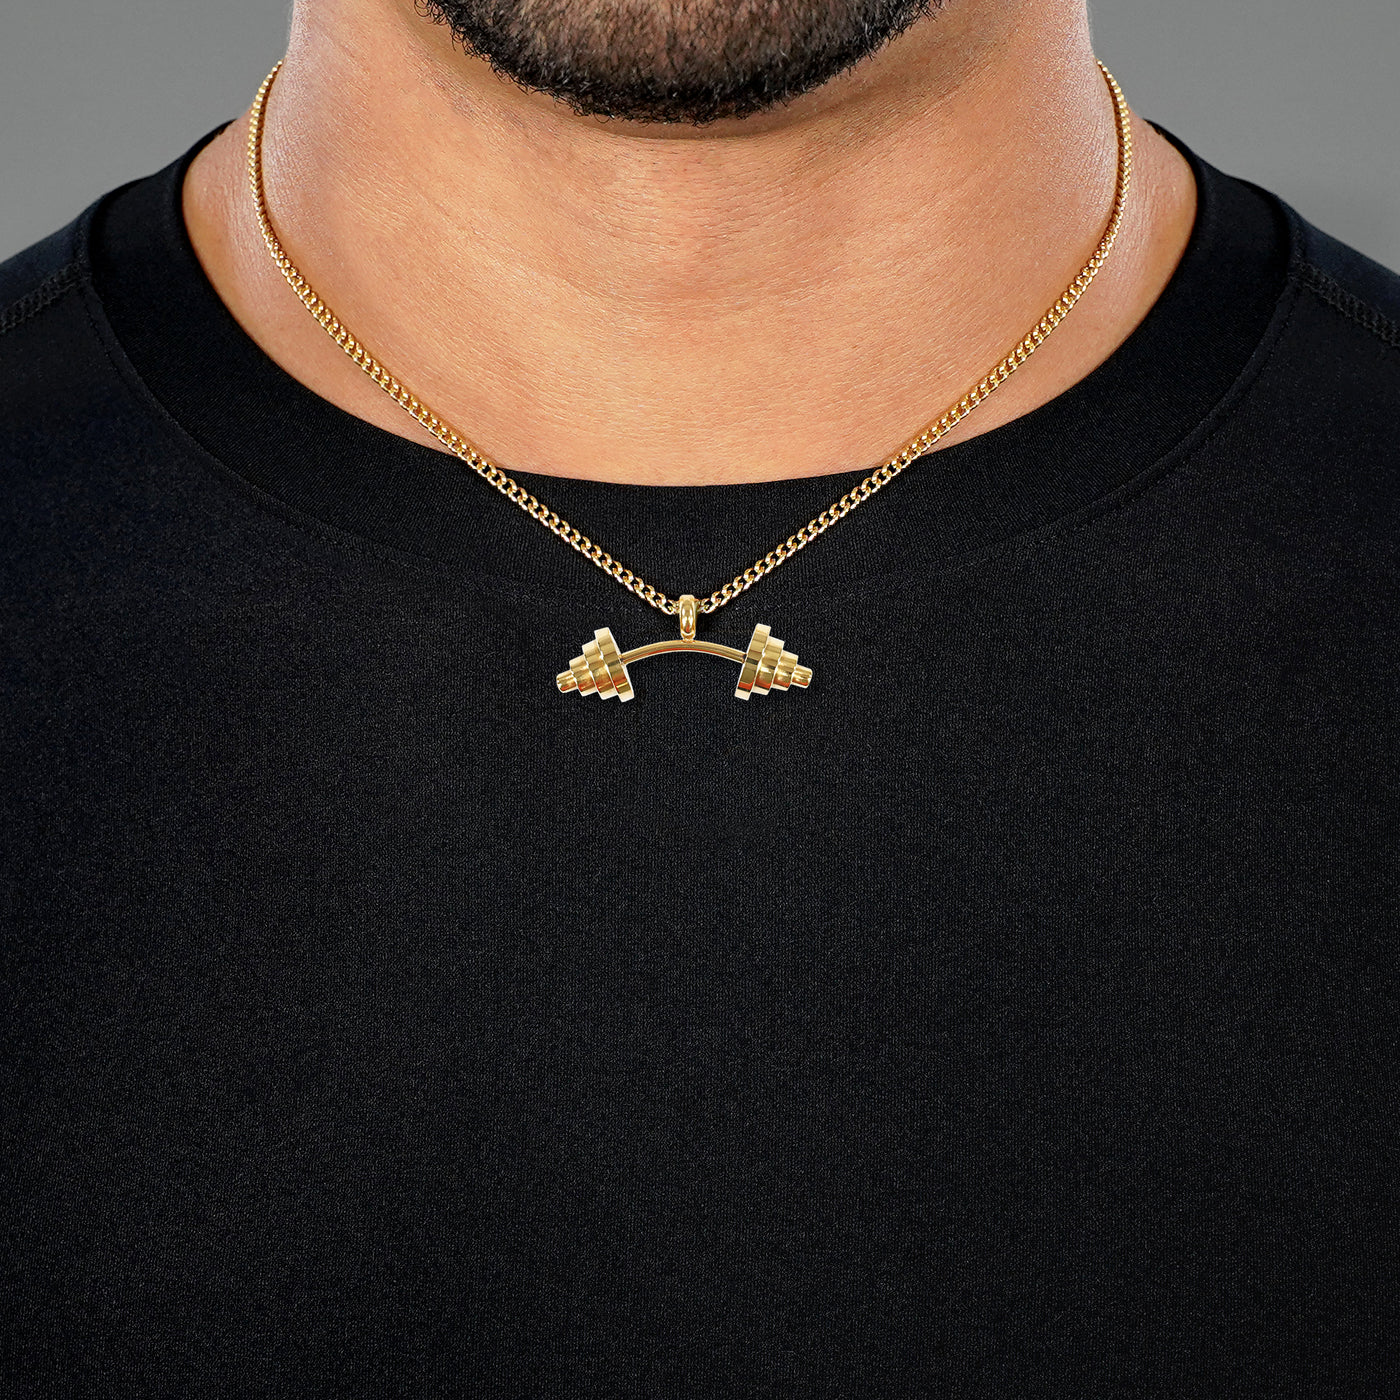 Gym Weights 1¾" Pendant with Chain Necklace - Gold Plated Stainless Steel